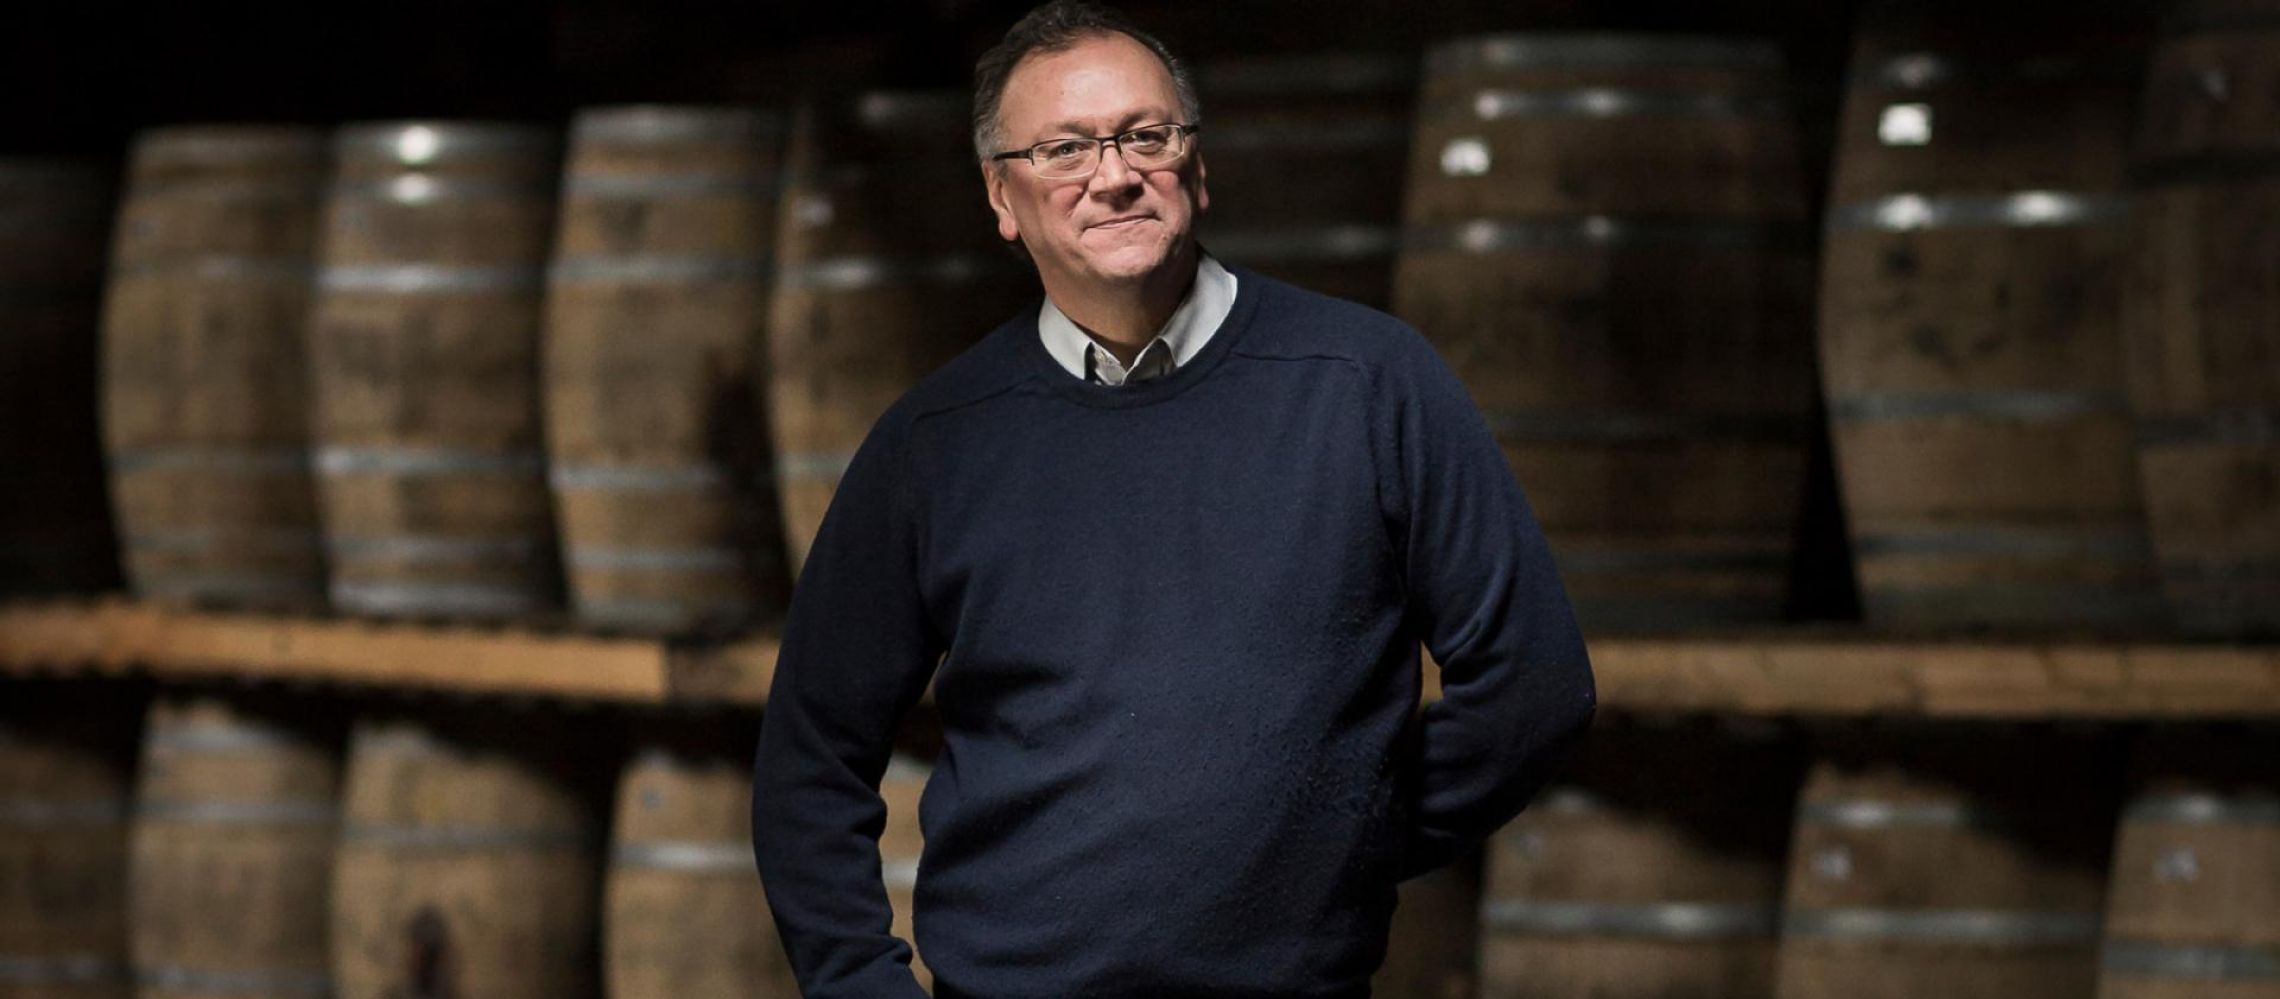 Photo for: Orchestrating the World’s Top Irish Whiskies: Billy Leighton